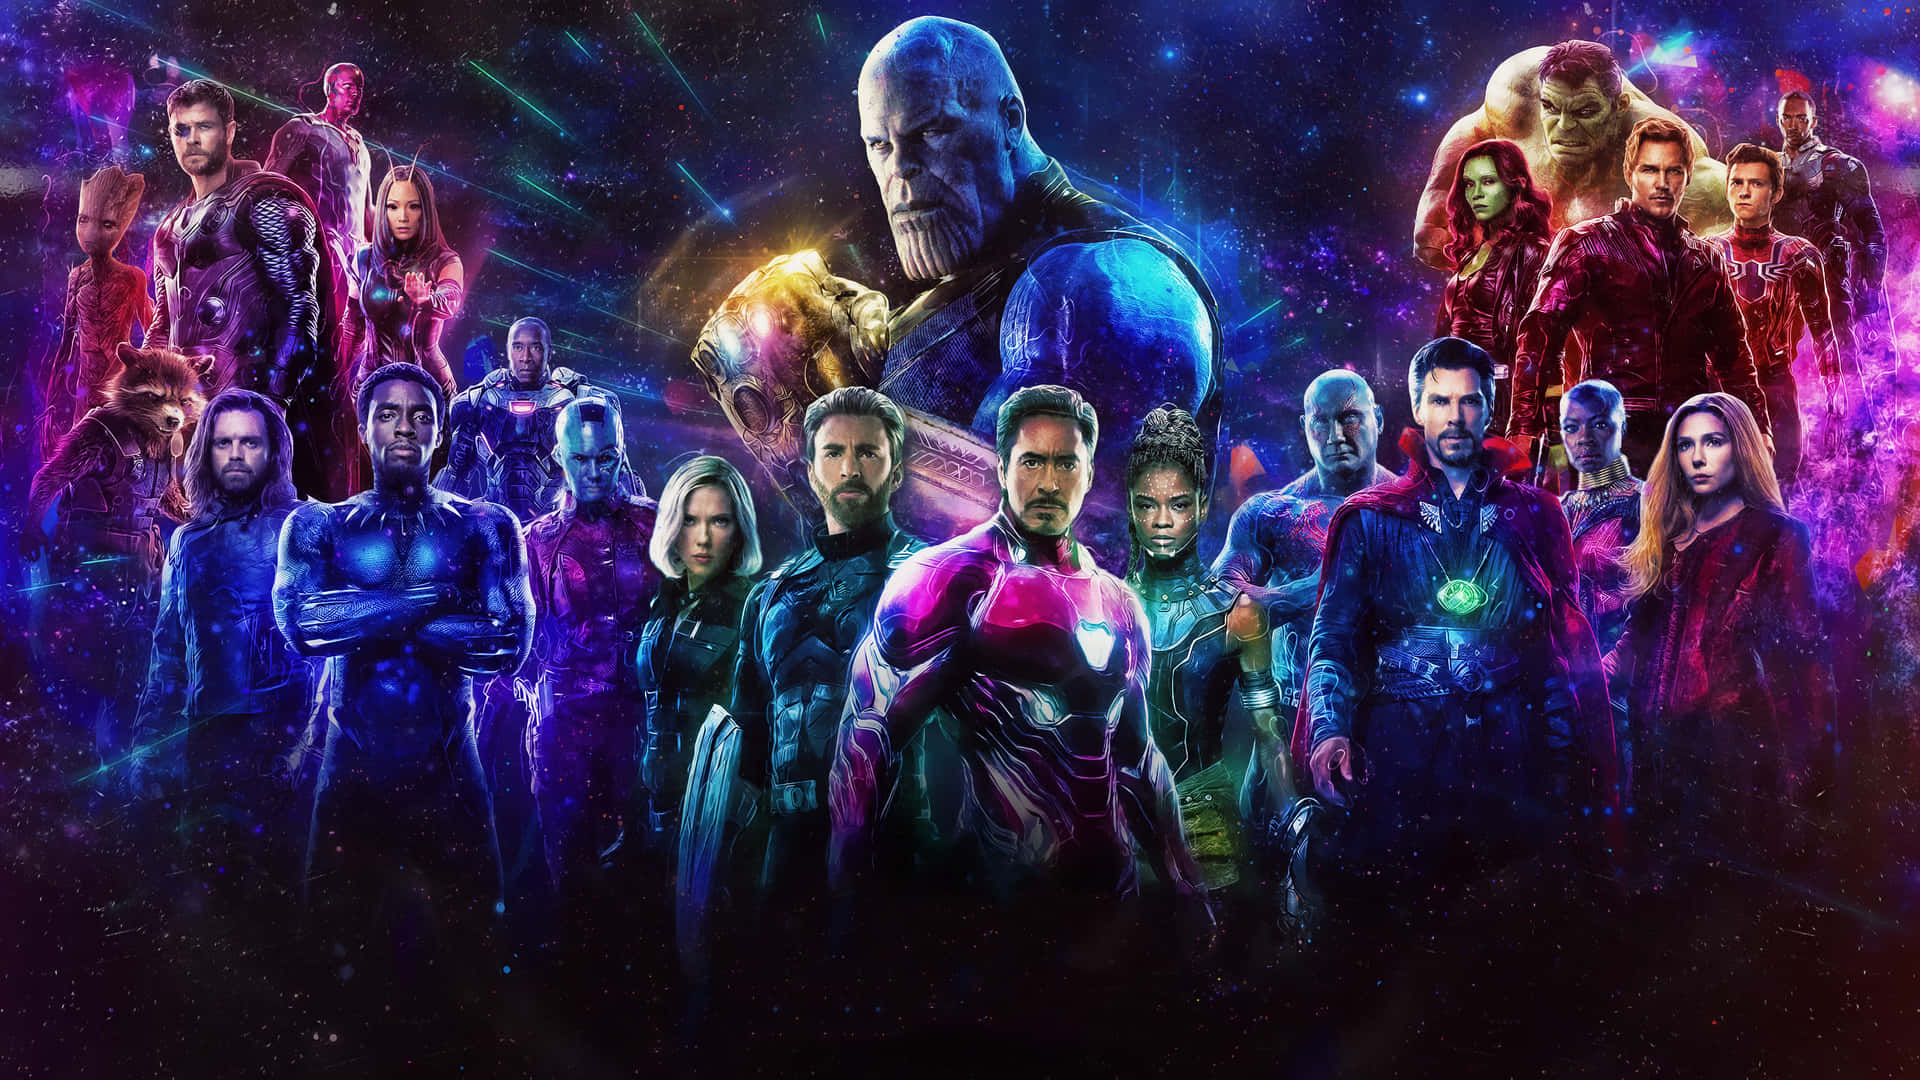 "Avengers Assemble - Protecting the Universe From the Evil Thanos" Wallpaper